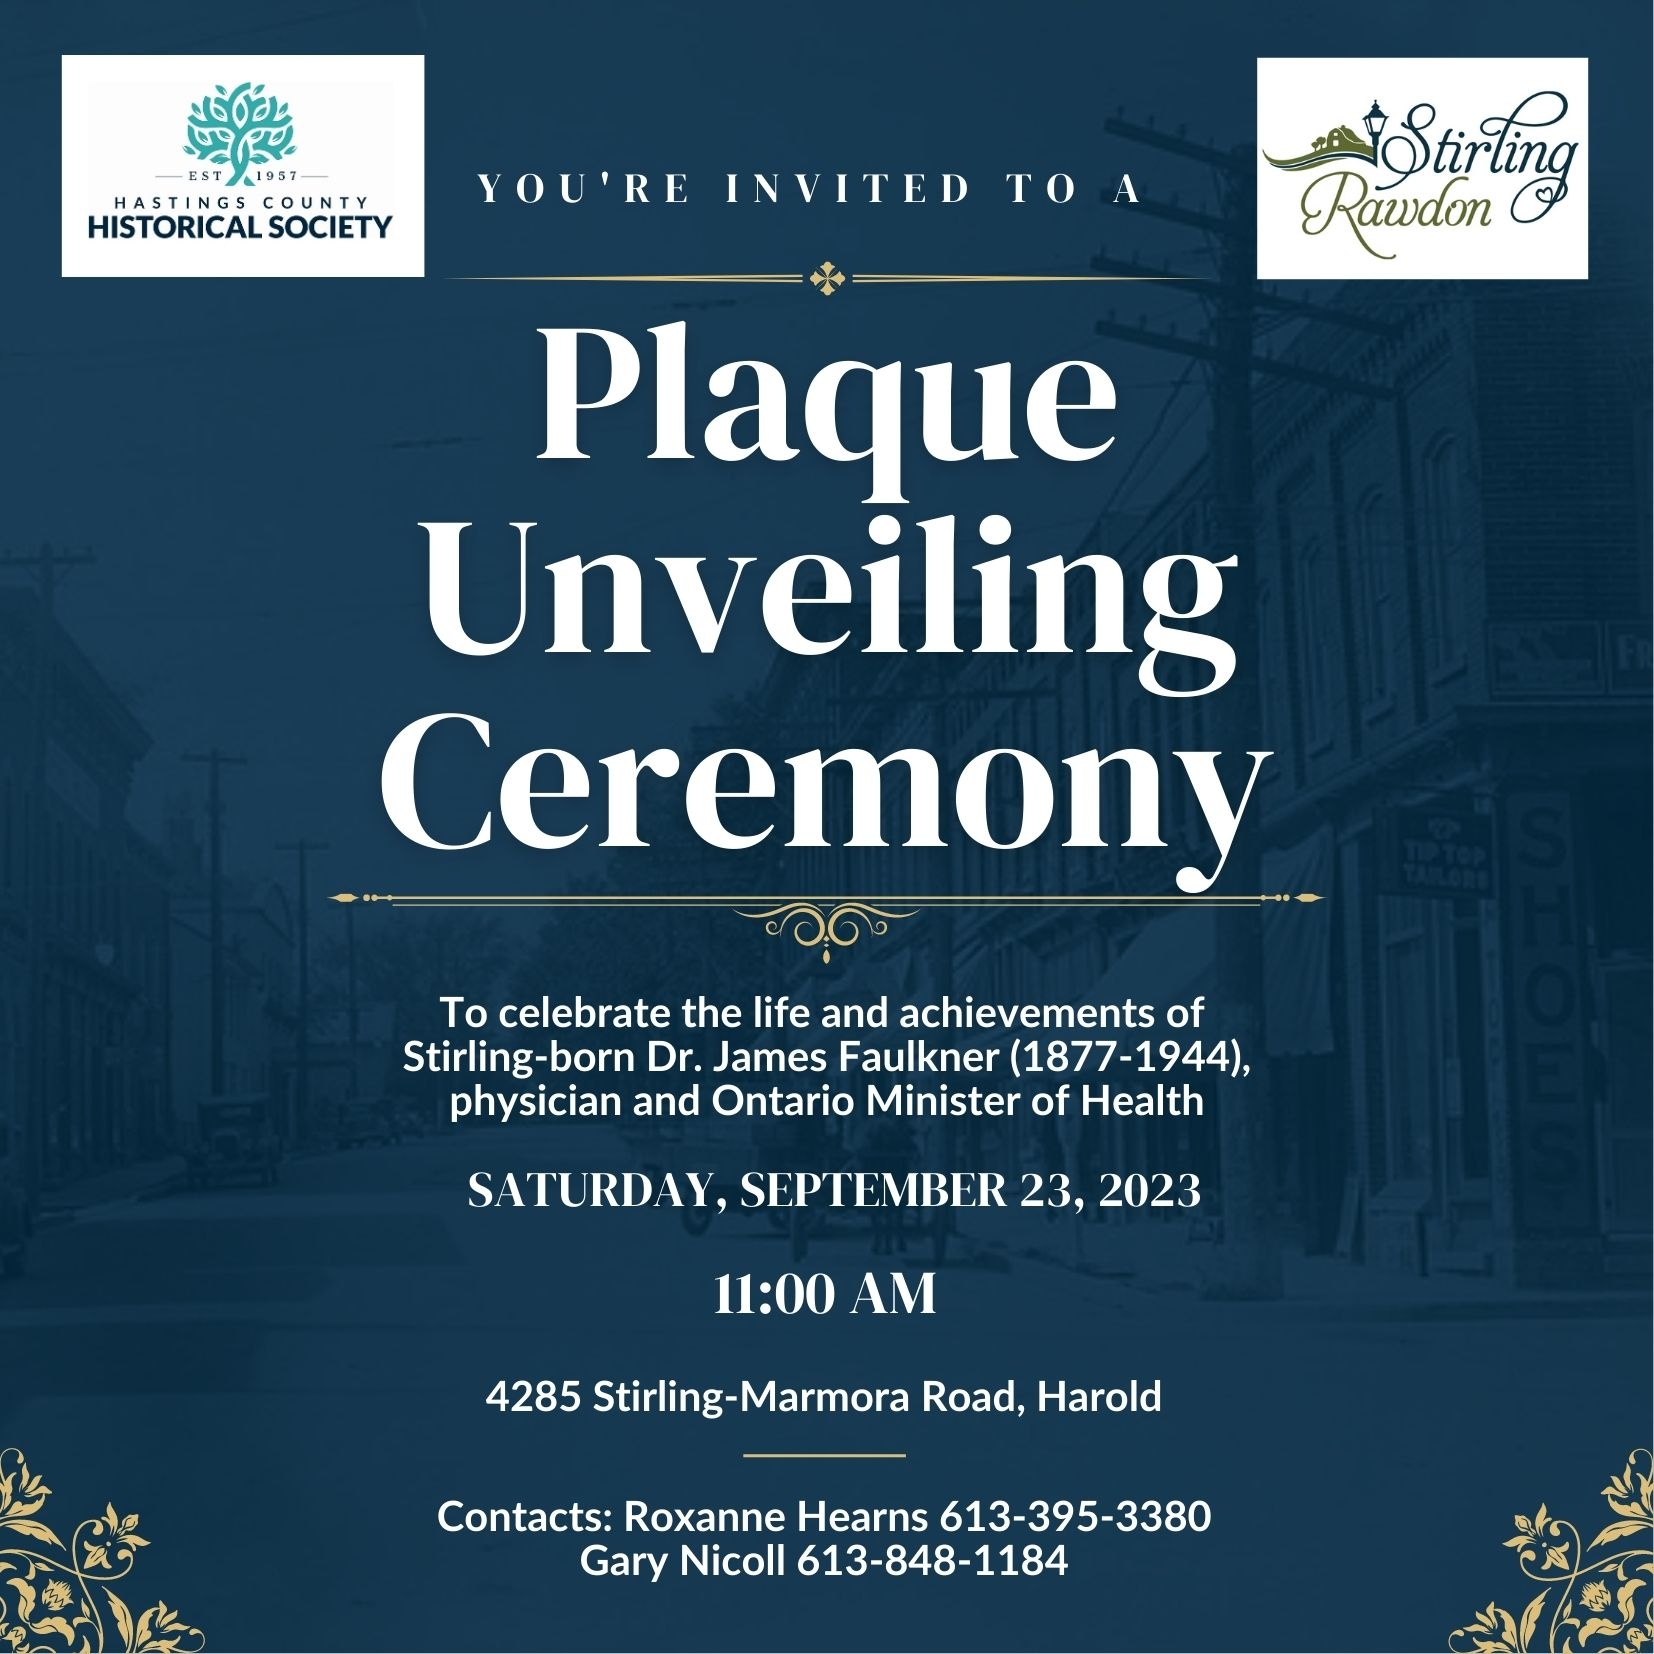 Hastings County Historical Society and the Township of Stirling-Rawdon invite you to a Plaque Unveiling Ceremony to celebrate the life and achievements of Stirling-born Dr. James Faulkner (1877-1944), physician and Ontario Minister of Health. Saturday September 23, 2023 11:00 A.M. 4285 Stirling-Marmora Road, Harold Contacts: Roxanne Hearns, 613-395-3380 Gary Nicoll, 613-848-1184